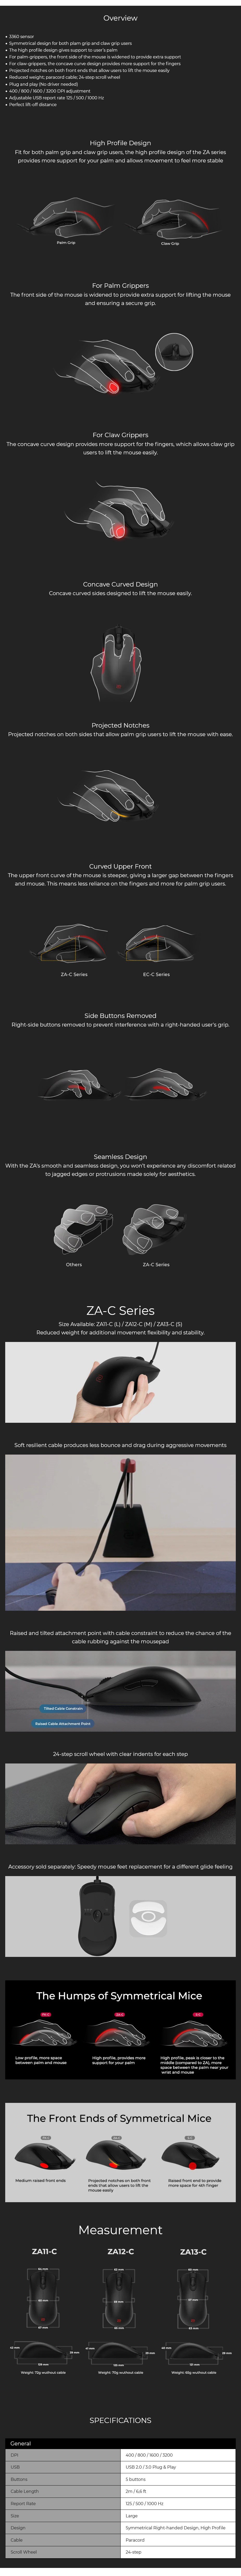 A large marketing image providing additional information about the product BenQ ZOWIE ZA11-C Esports Gaming Mouse - Additional alt info not provided